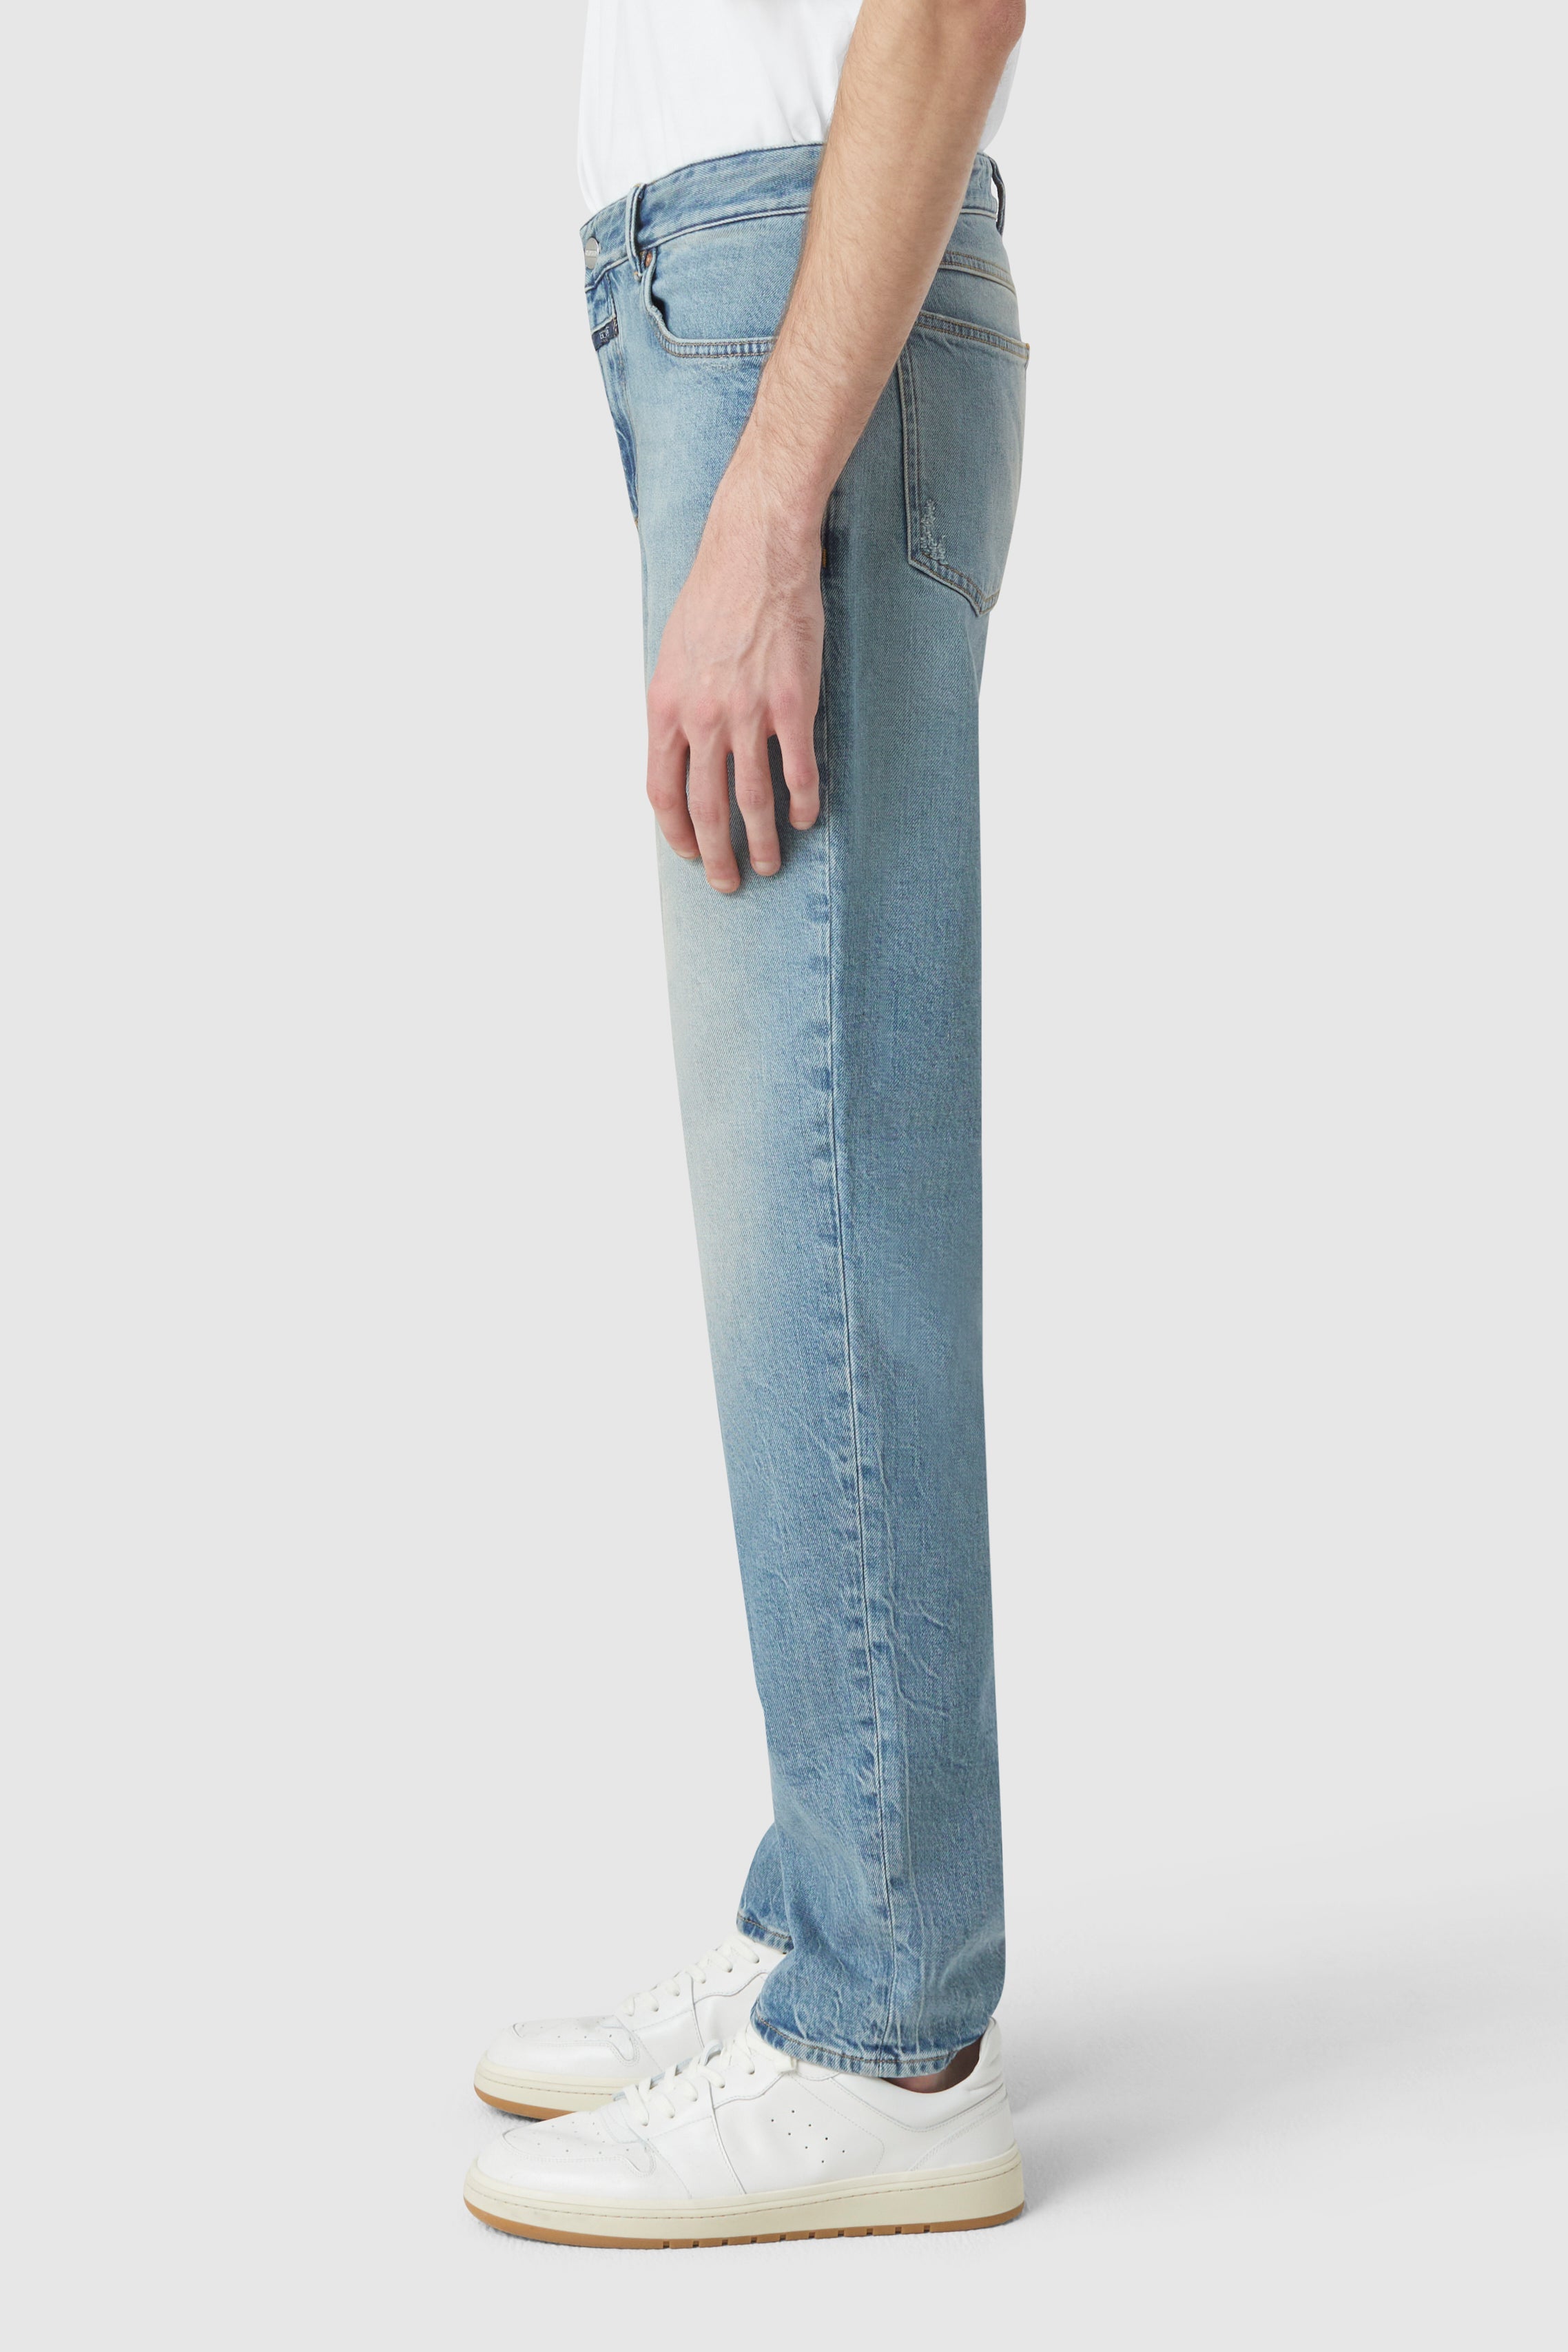 CLOSED-OUTLET-SALE-STYLE-NAME-UNITY-SLIM-JEANS-Hosen-ARCHIVE-COLLECTION-3_9d427458-54db-4b45-880c-6cb39006a425.jpg